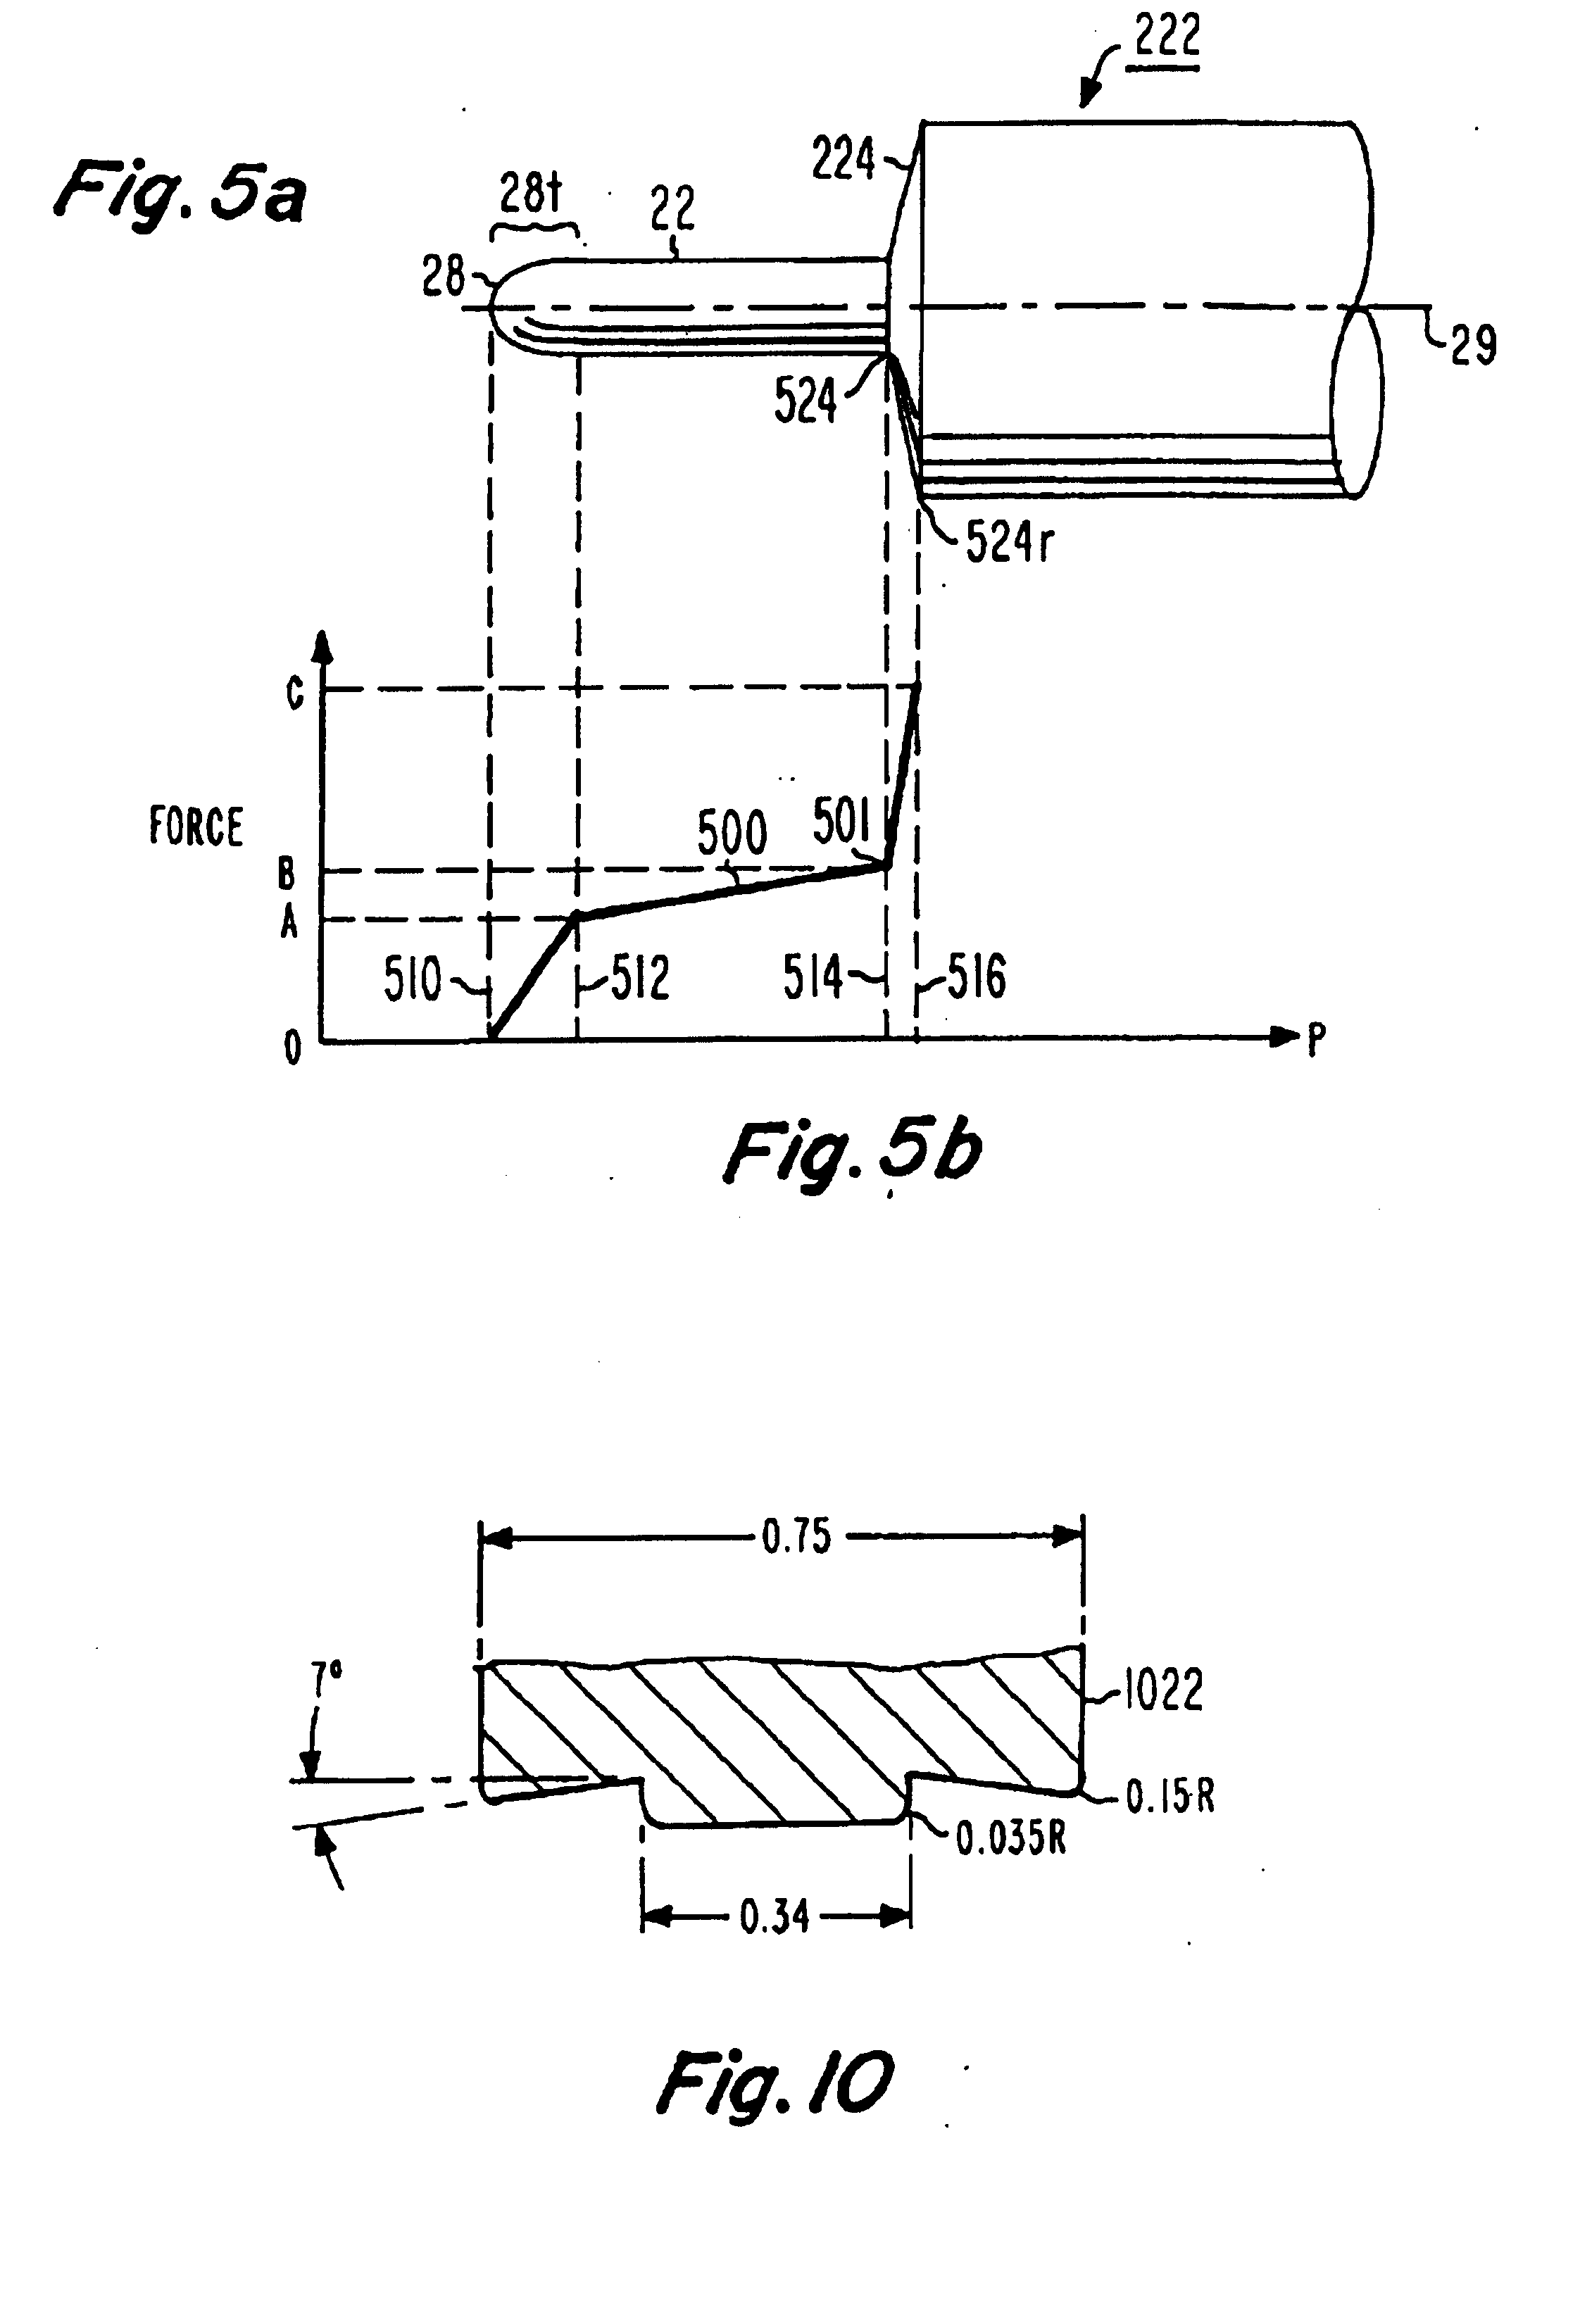 Stir-friction hot working control system